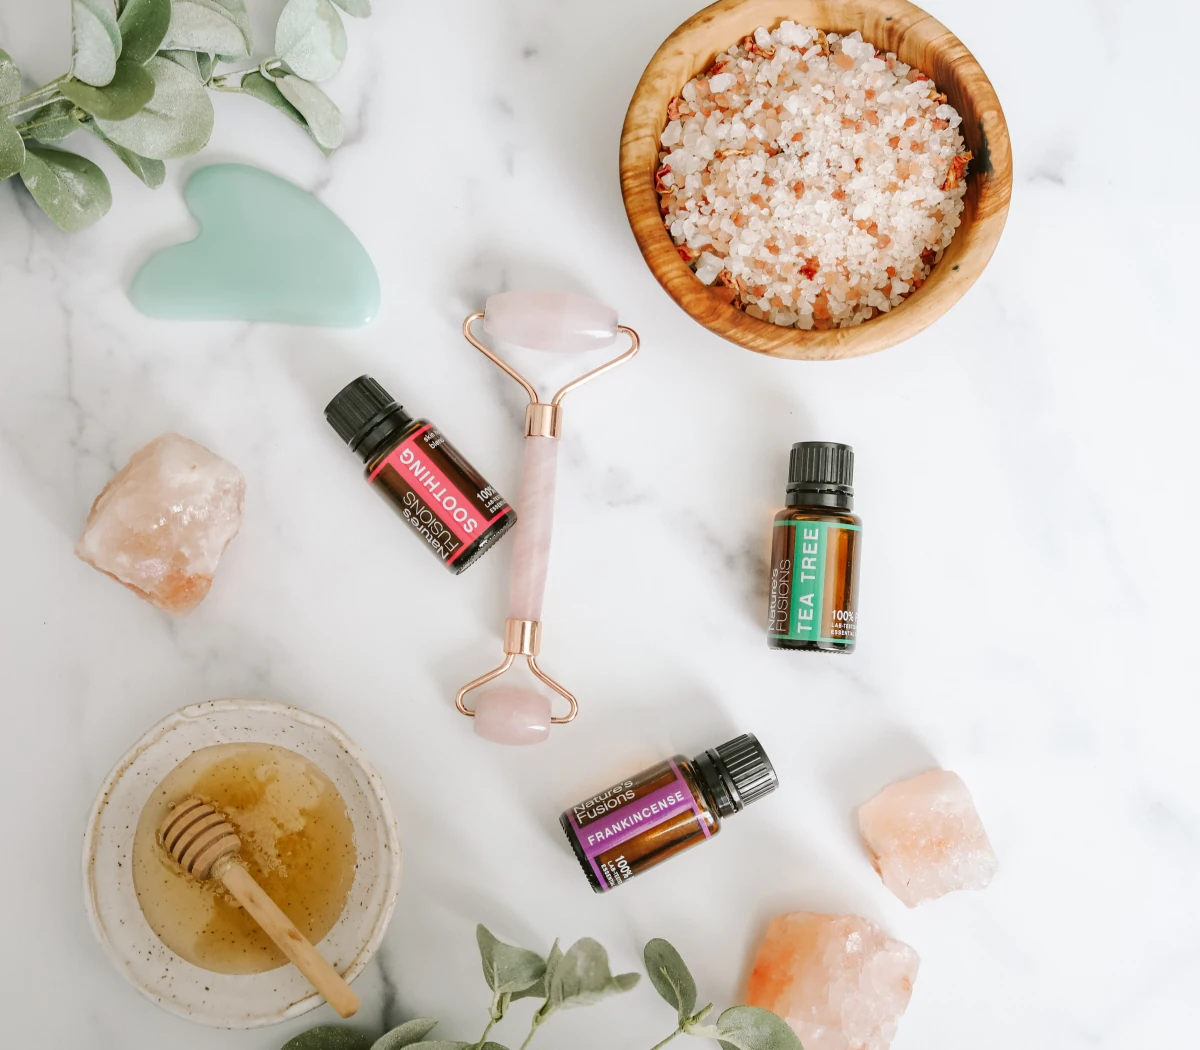 Collection of Nature's Fusions essential oils